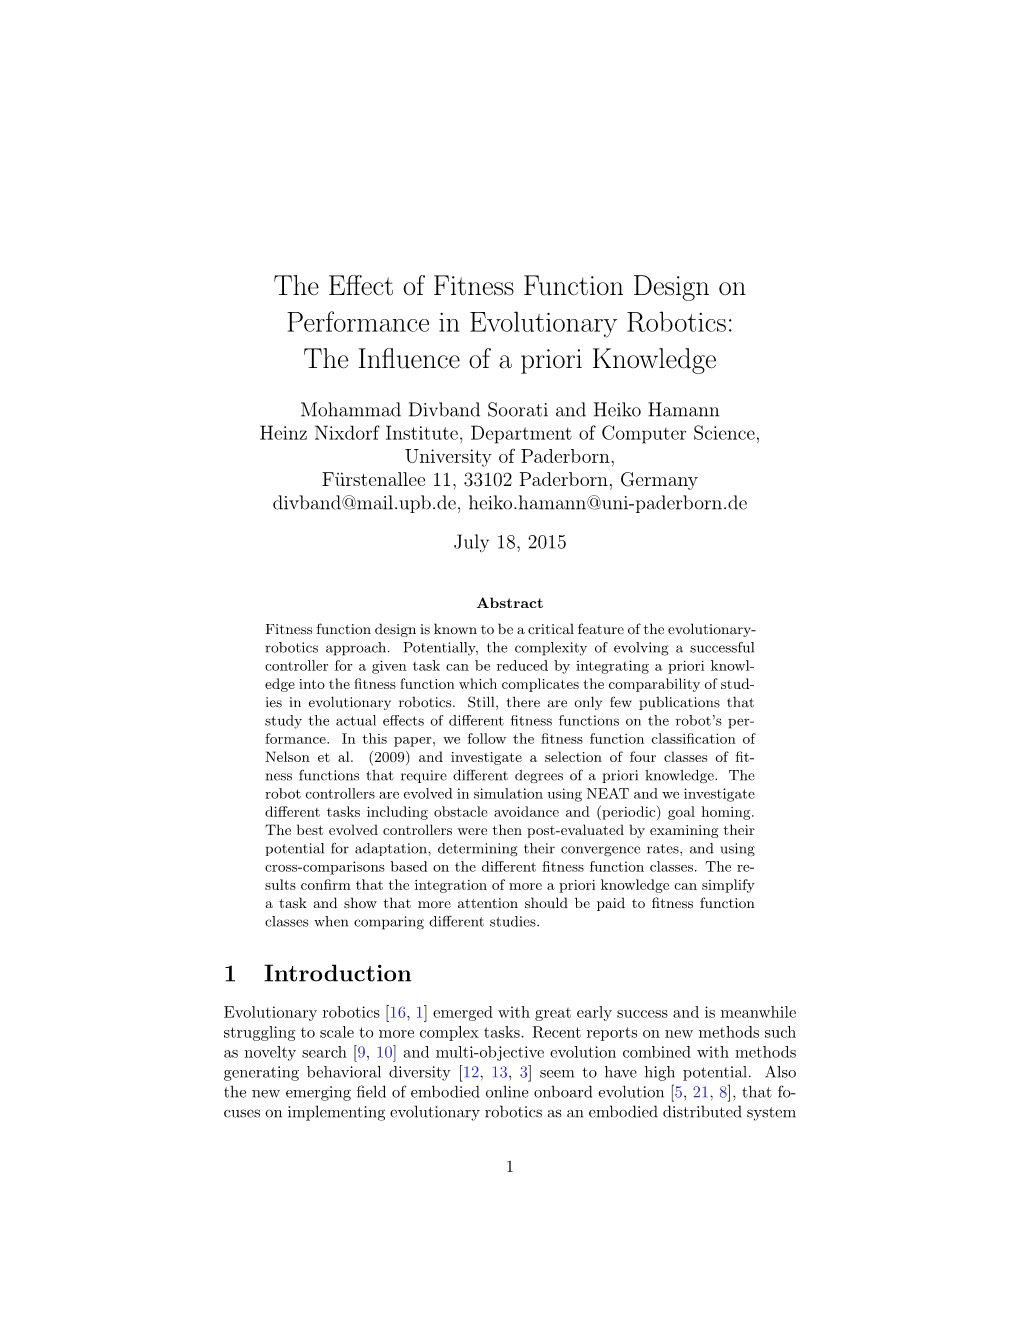 The Effect of Fitness Function Design on Performance In